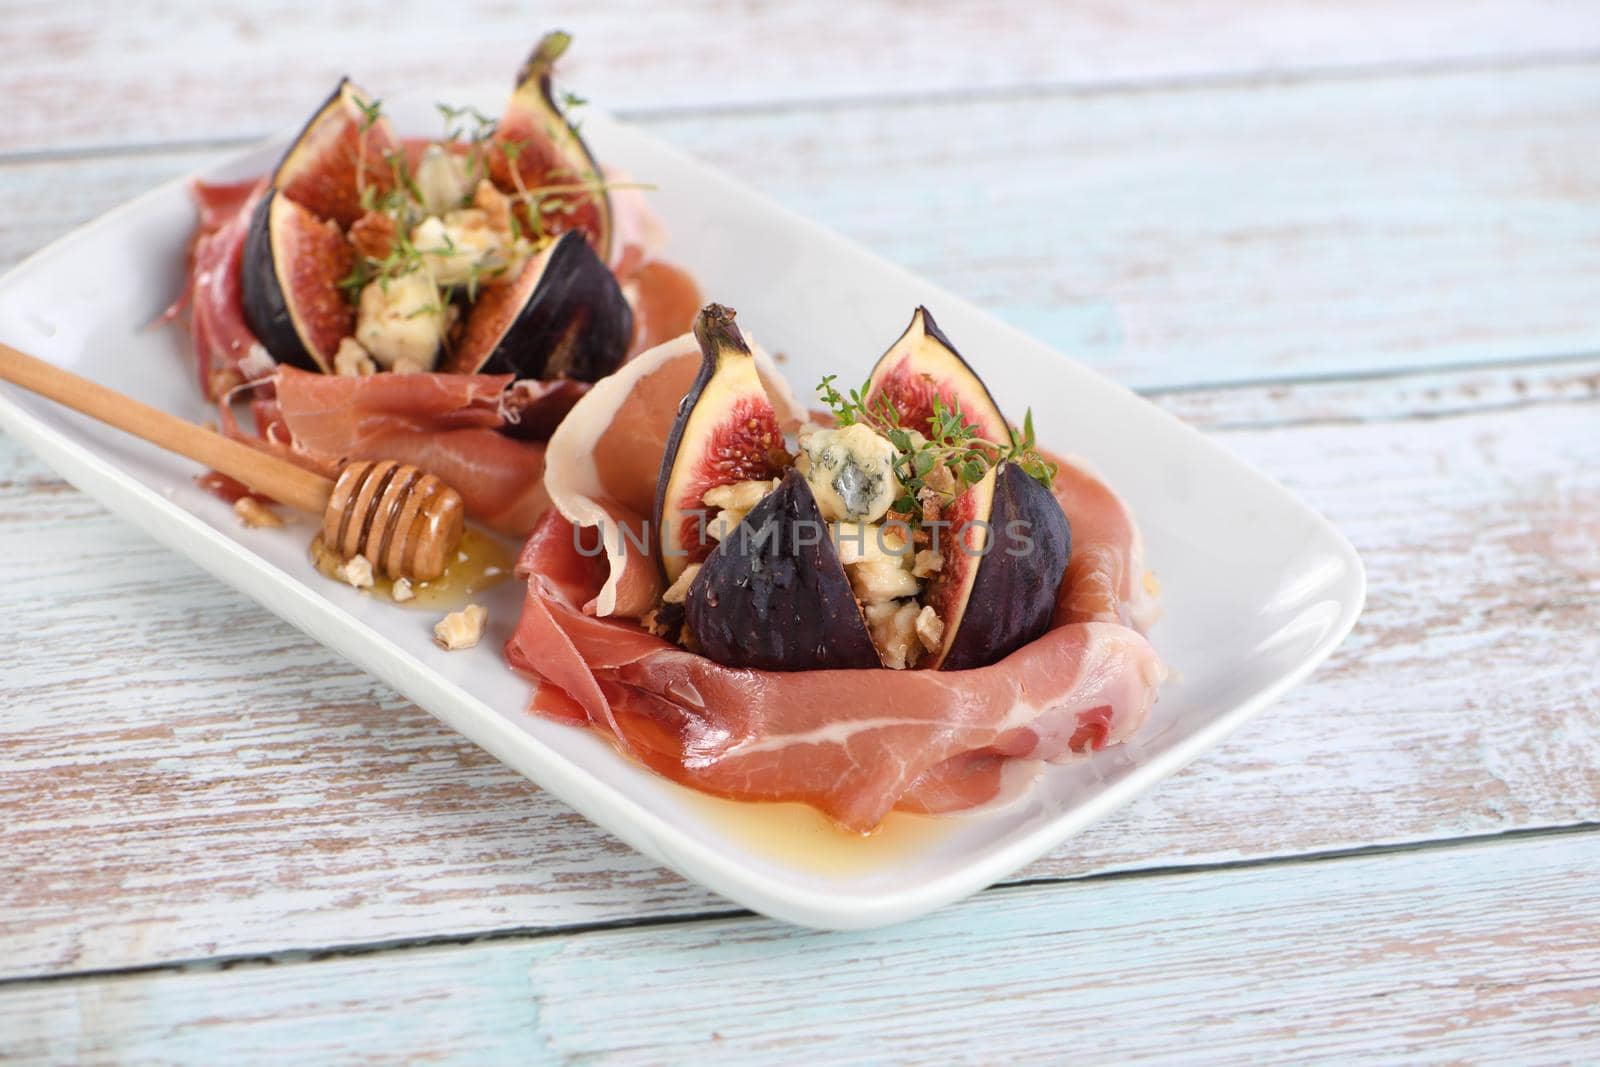 Figs wrapped in Parma ham by Apolonia